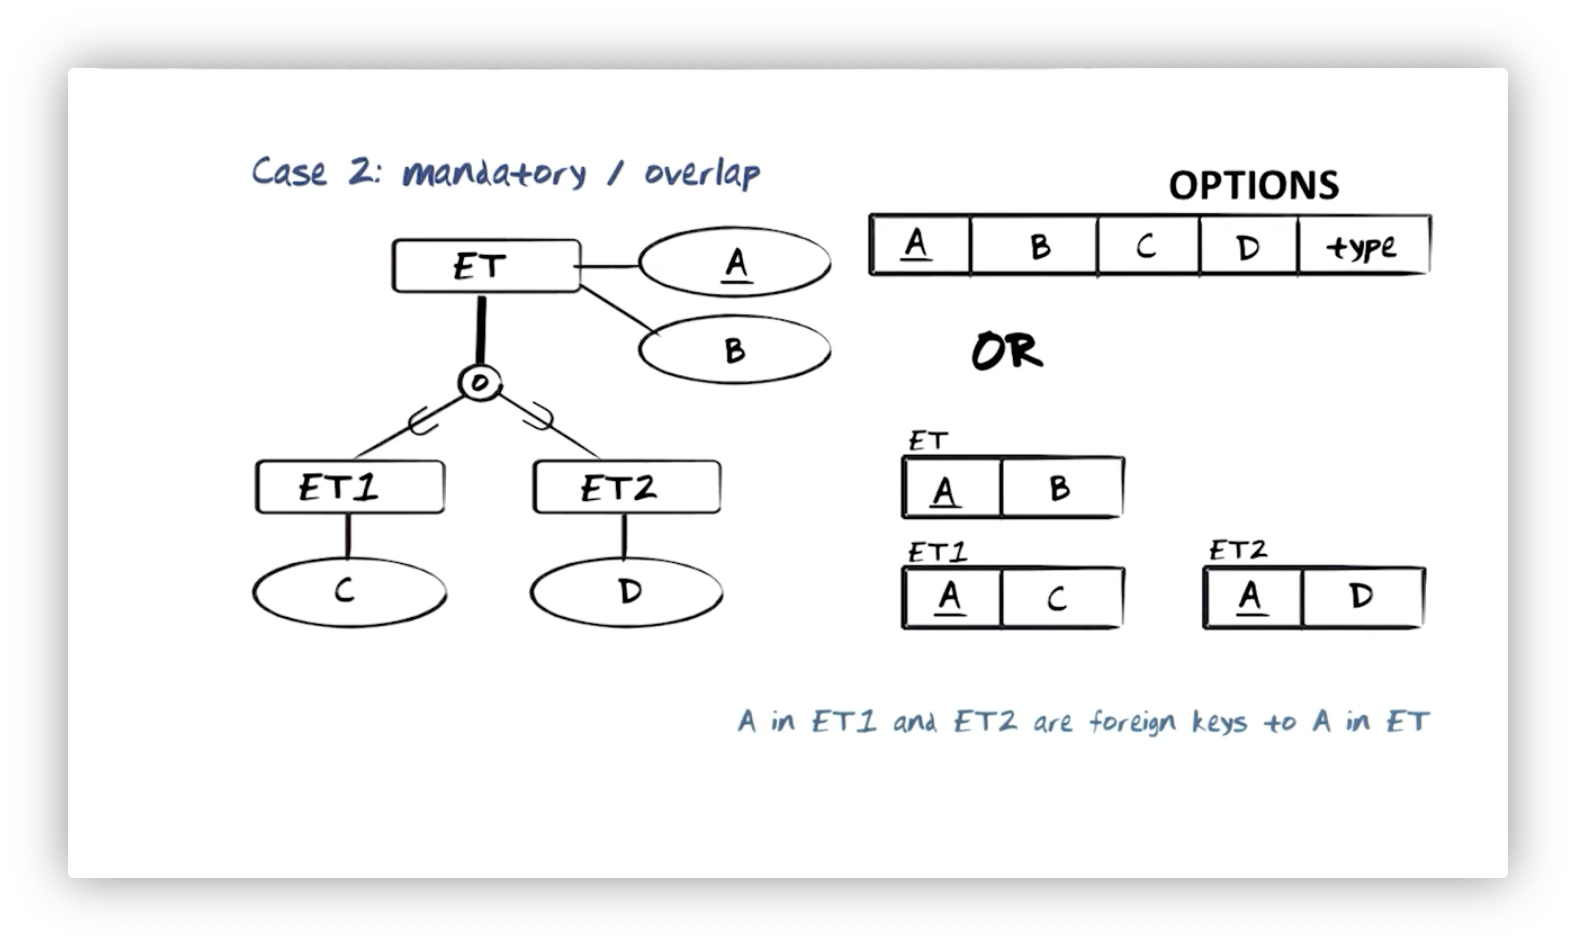 Two relational strategies for a mandatory super/subtype relationship with
overlap allowed.